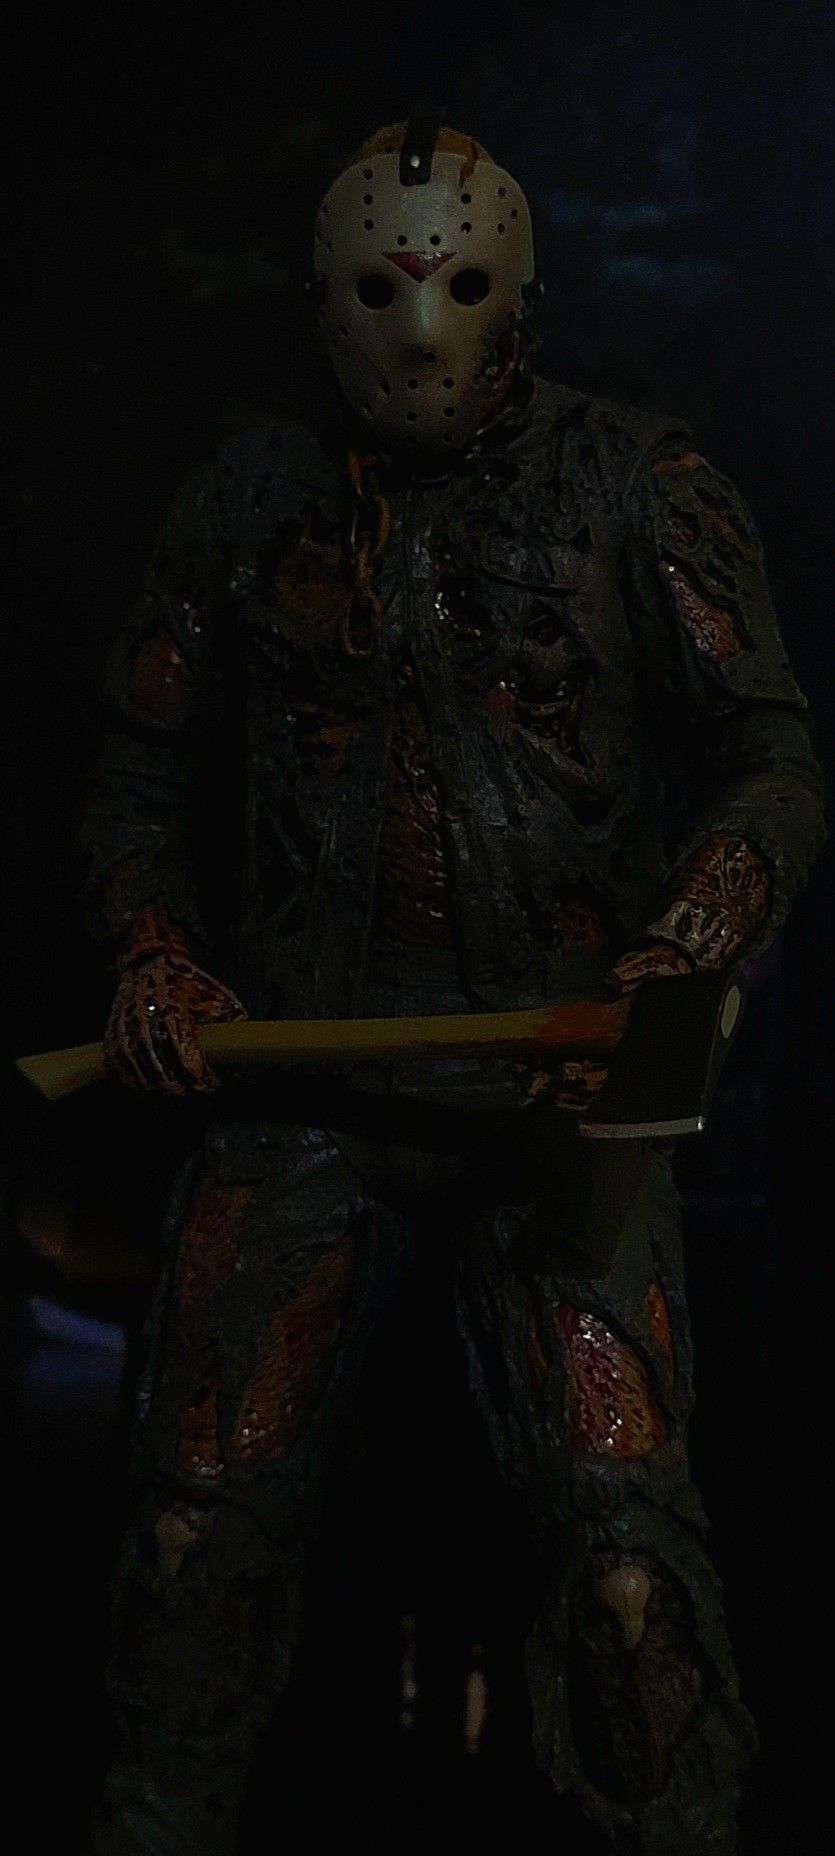 Friday the 13th The new blood neca figure